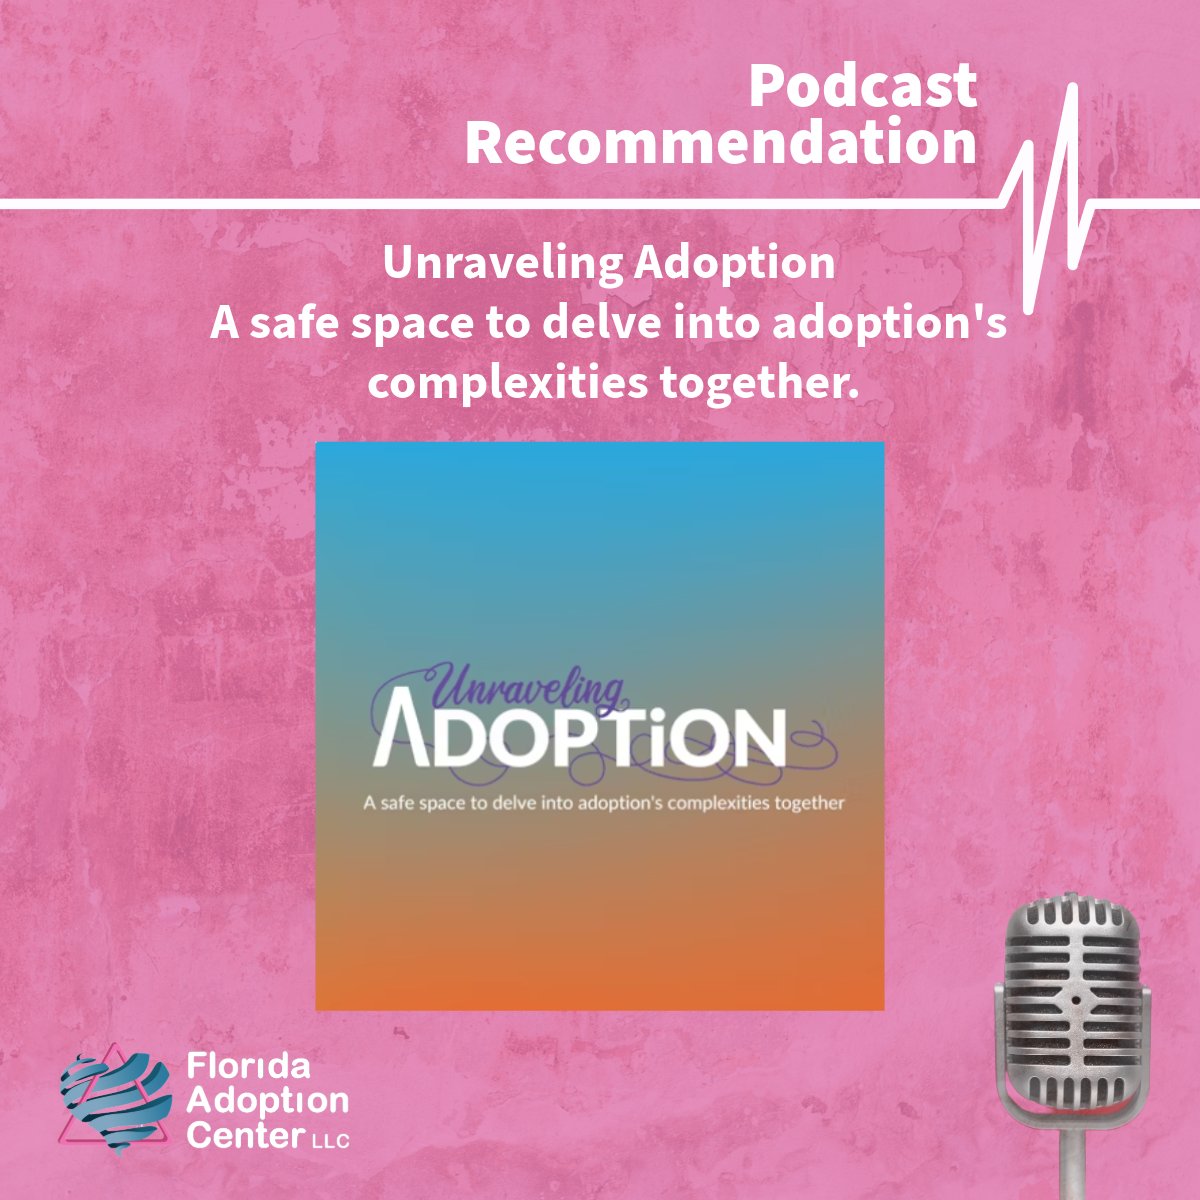 CHeck out this podcast: Unraveling Adoption
A safe space to delve into adoption's complexities together.  
pod.link/1661505668

At Florida Adoption Center love makes a difference!

#FloridaAdoptionCenter #adoptioninformation #adoptioneducation